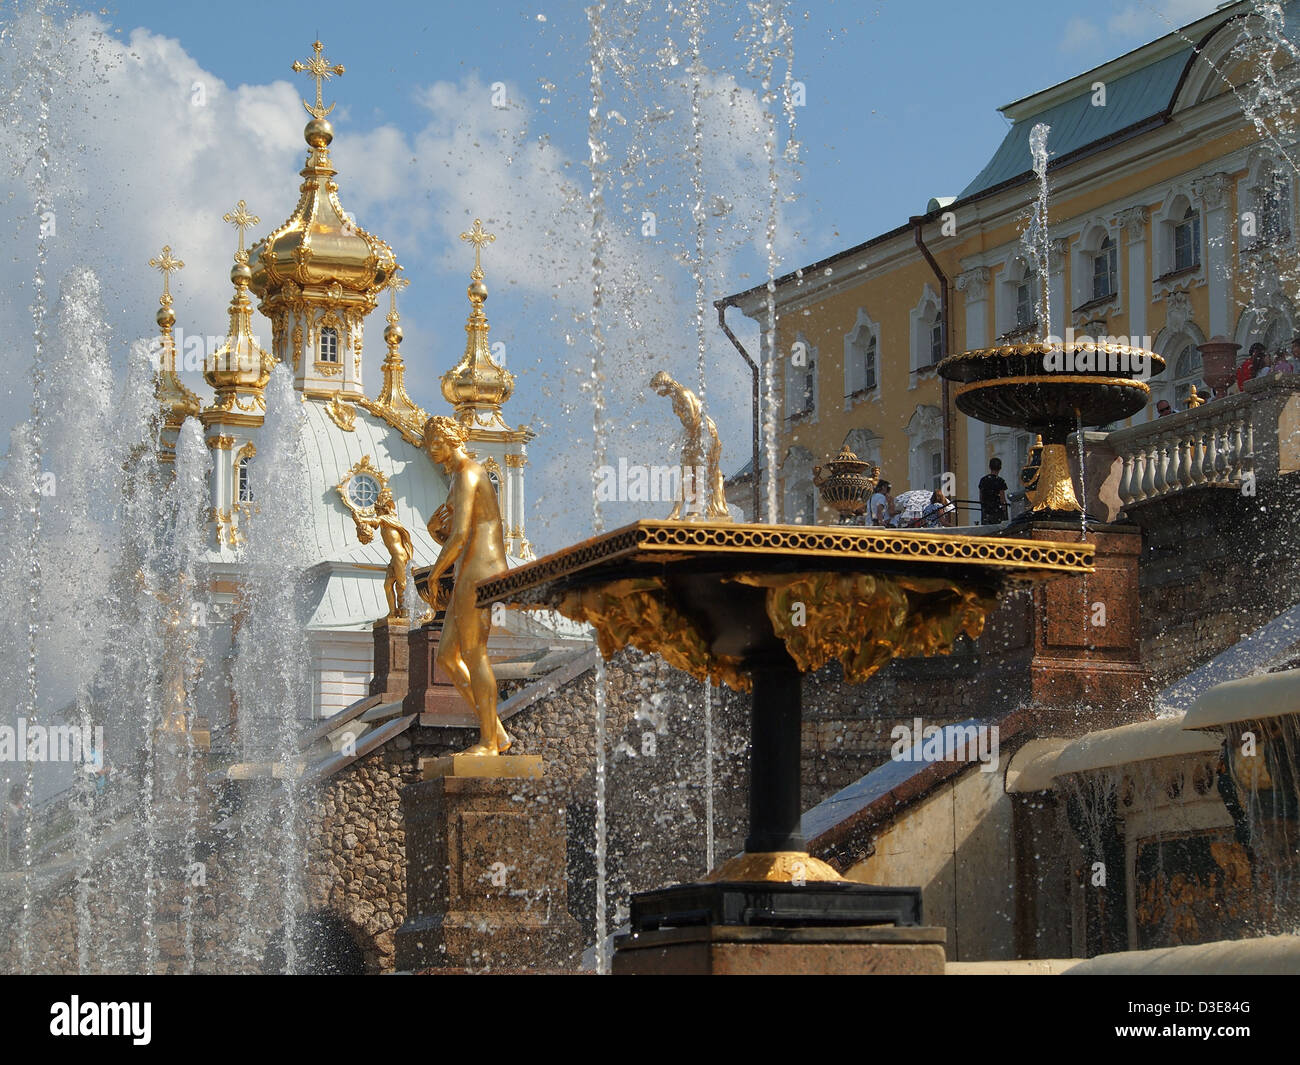 The Fountains of Peterhof Palace at Peterhof, St. Petersburg, Russia Stock Photo